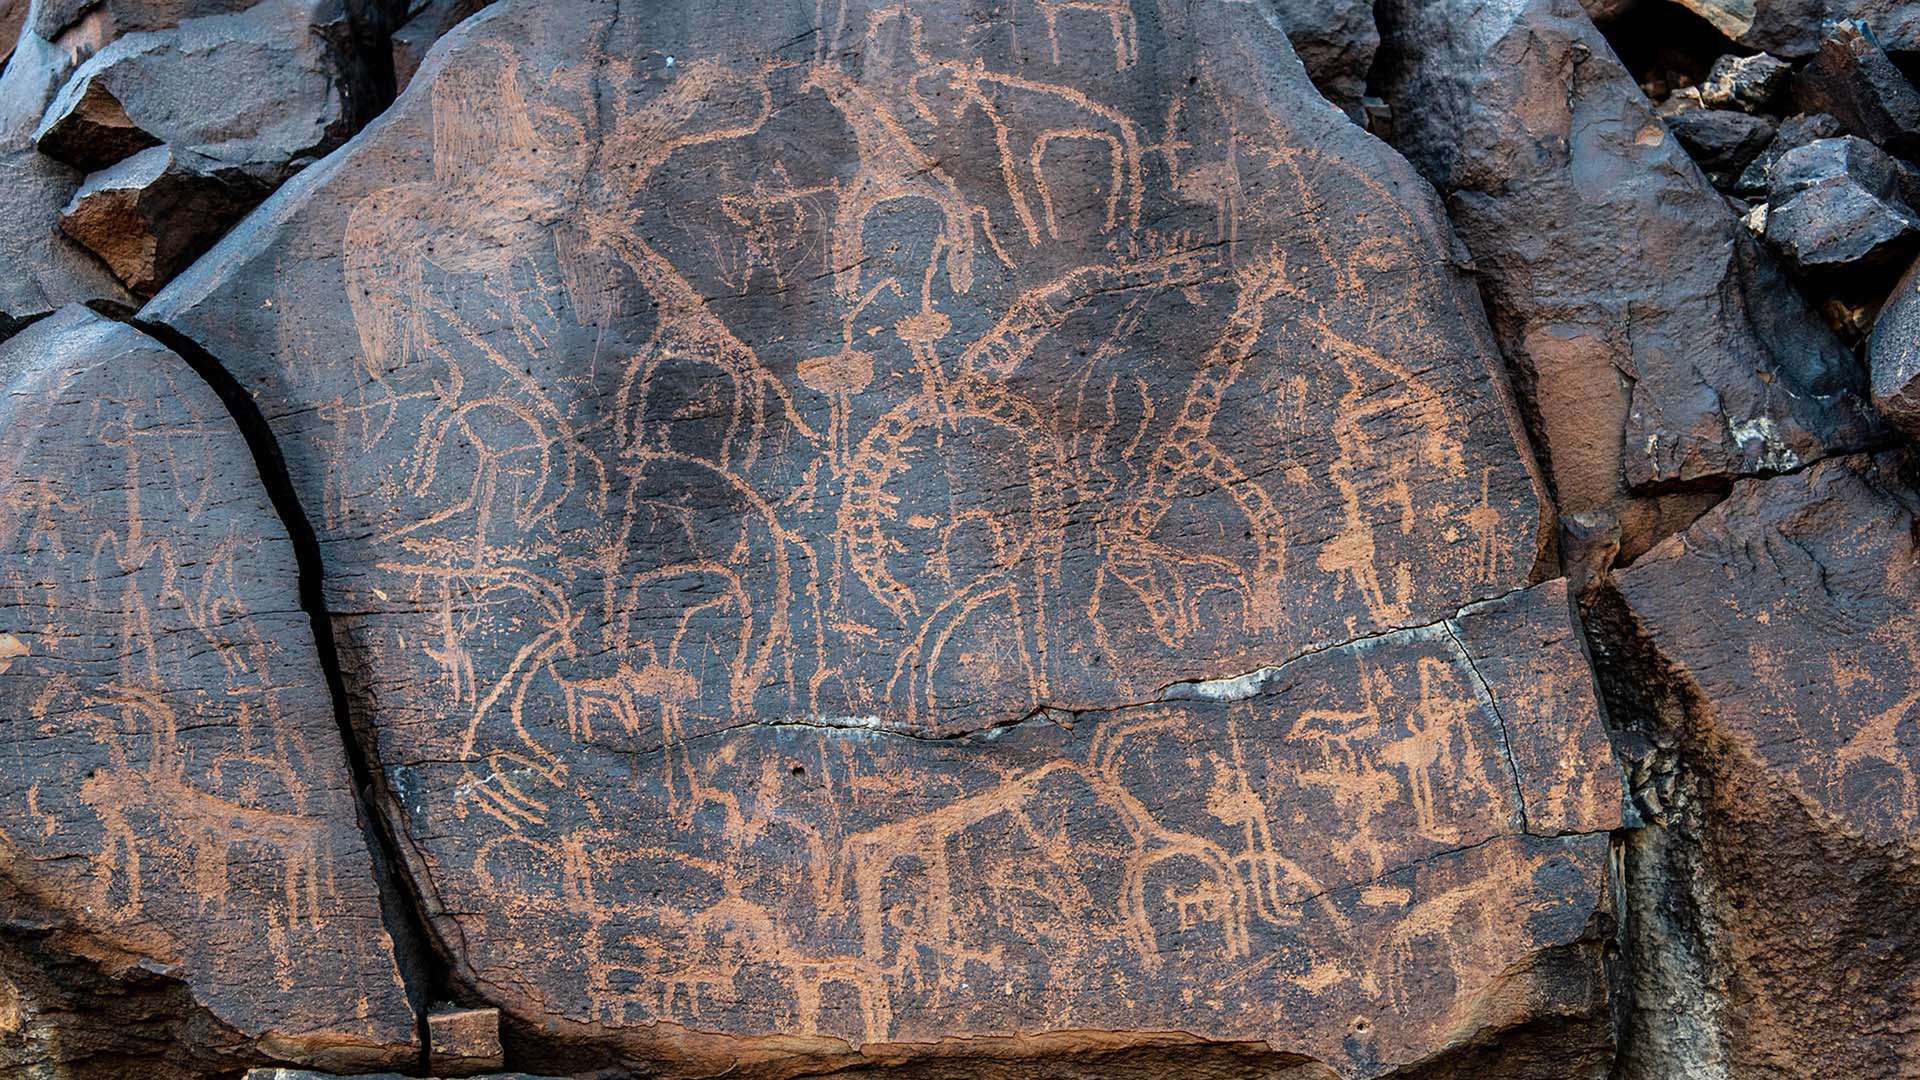 Experience ancient history up close at Abourma Rock Art Site